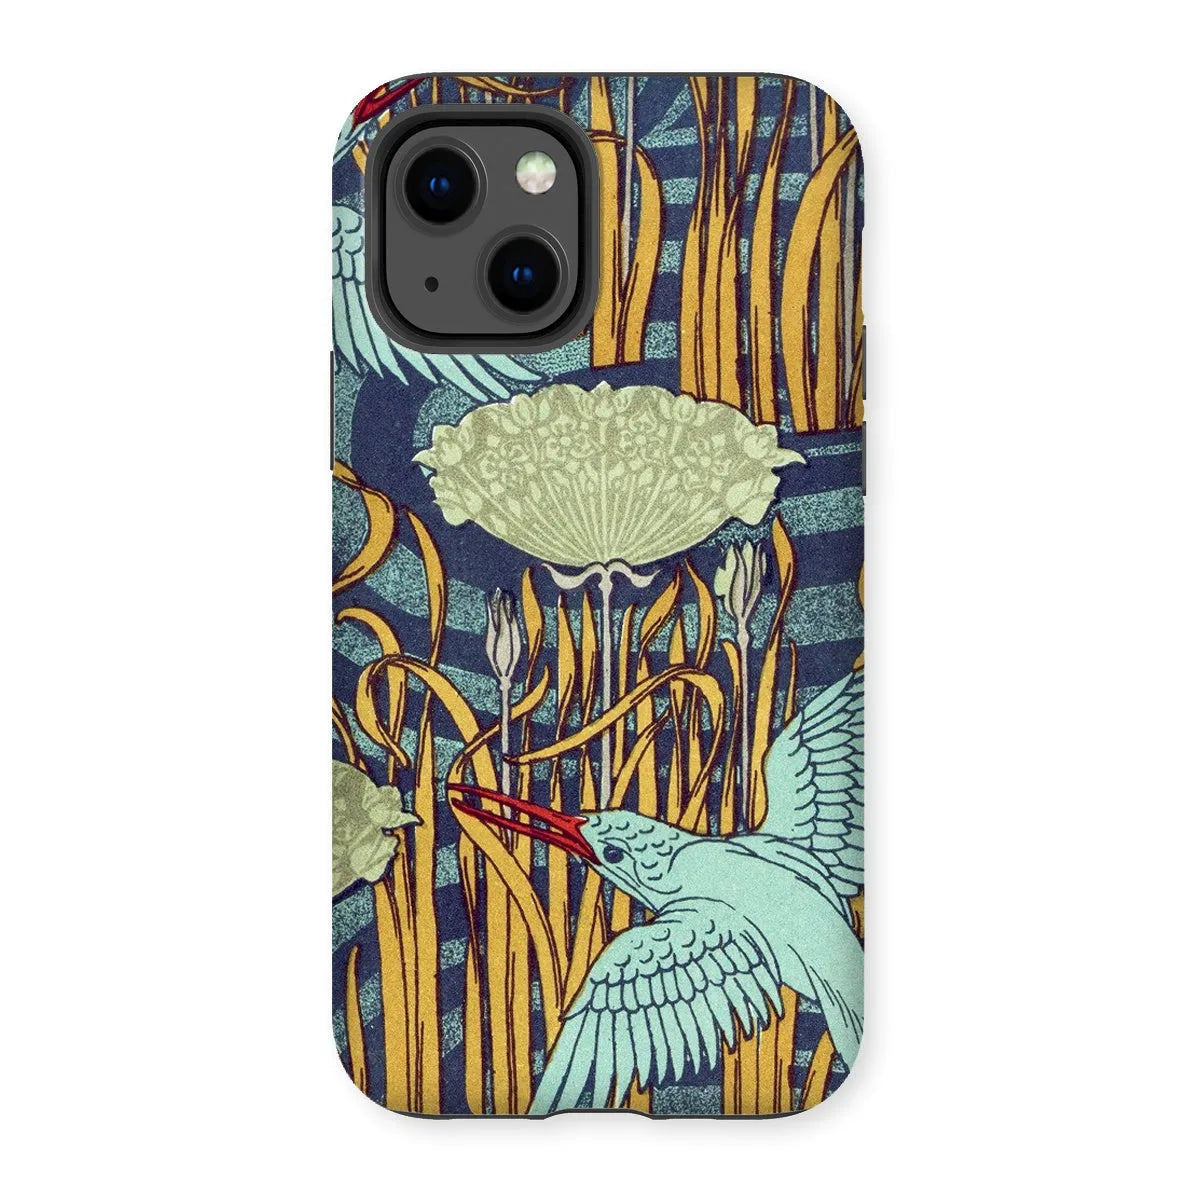 Kingfishers French Art Phone Case - Maurice Pillard Verneuil - Iphone 13 / Matte - Mobile Phone Cases - Aesthetic Art